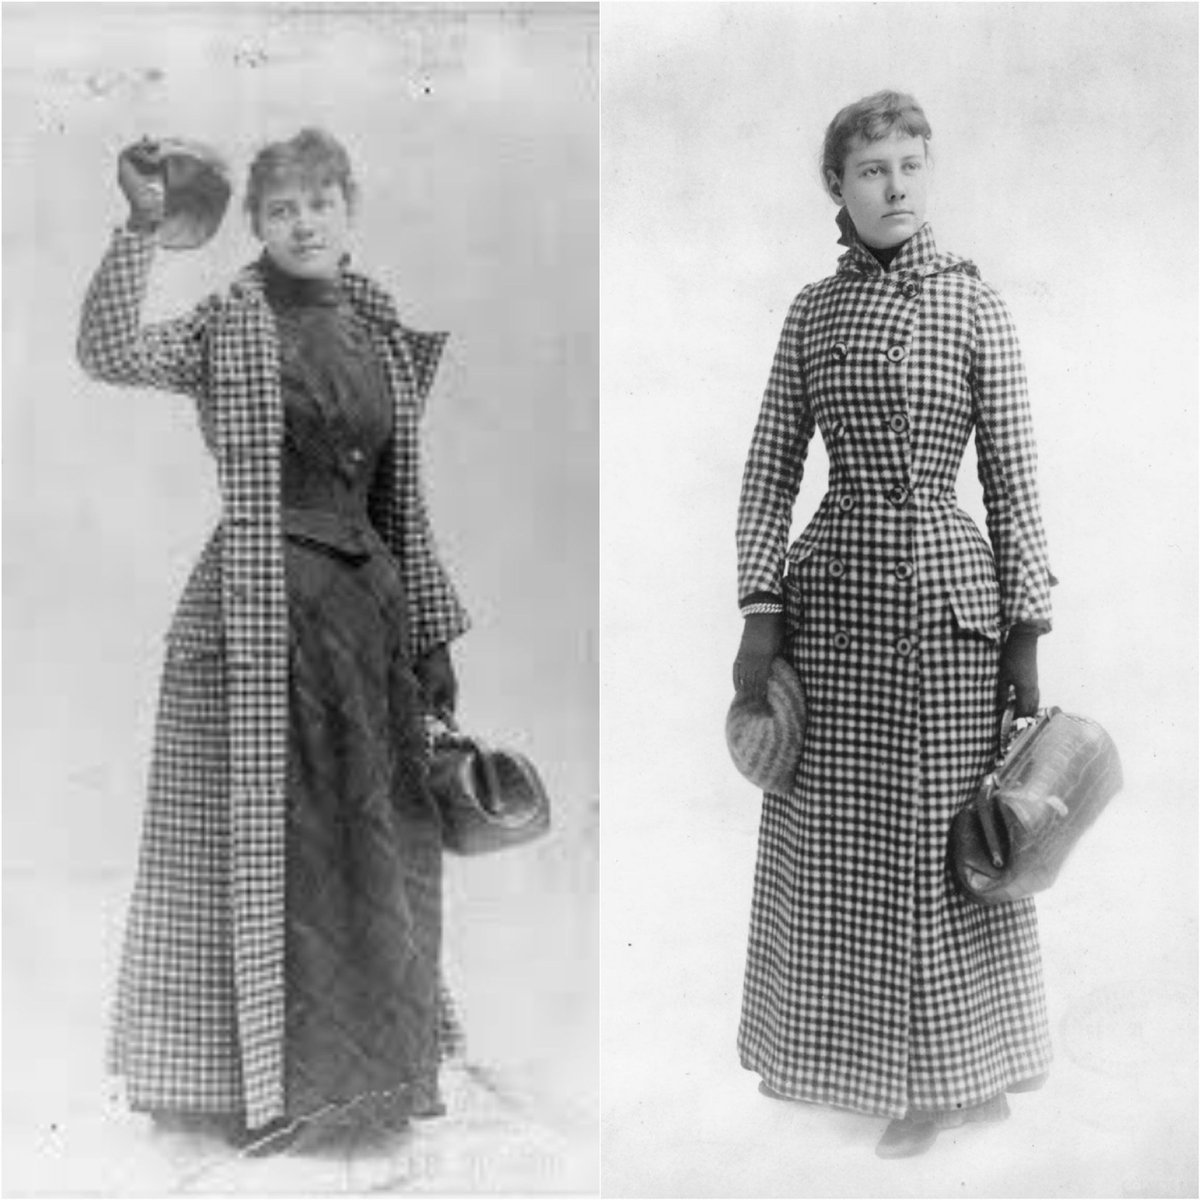 American journalist Elizabeth Cochrane Seaman, better known as #NellieBly, was born #OnThisDay in 1864. She is known for her record-breaking trip around the world in 72 days, which she undertook wearing a wool ghille cap, scotch ulster coat, and two-piece dress. #womenshistory